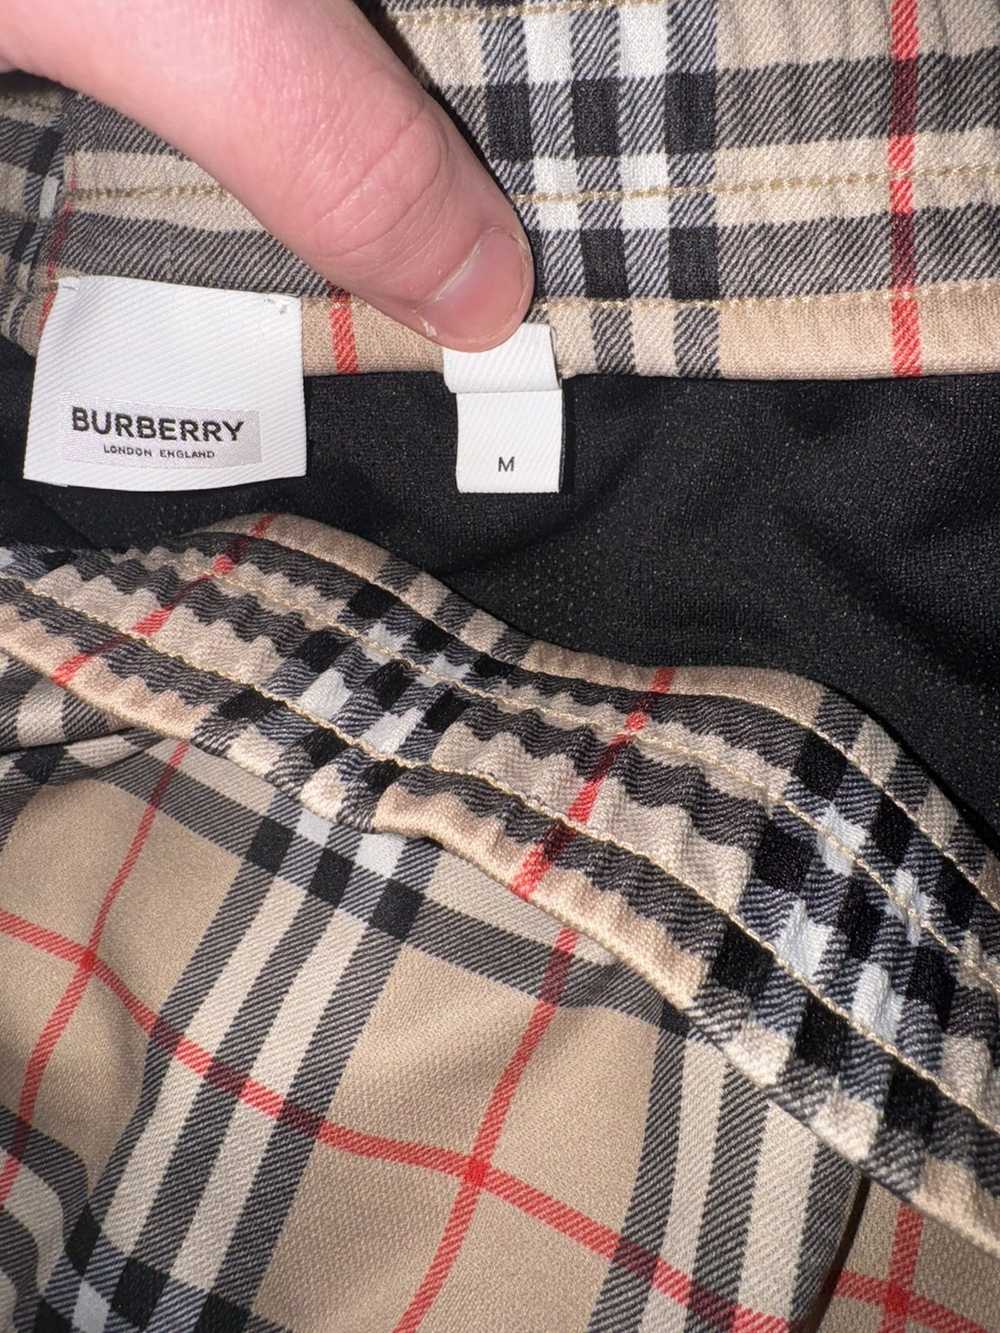 Burberry × Streetwear Burberry Checkered Shorts - image 4